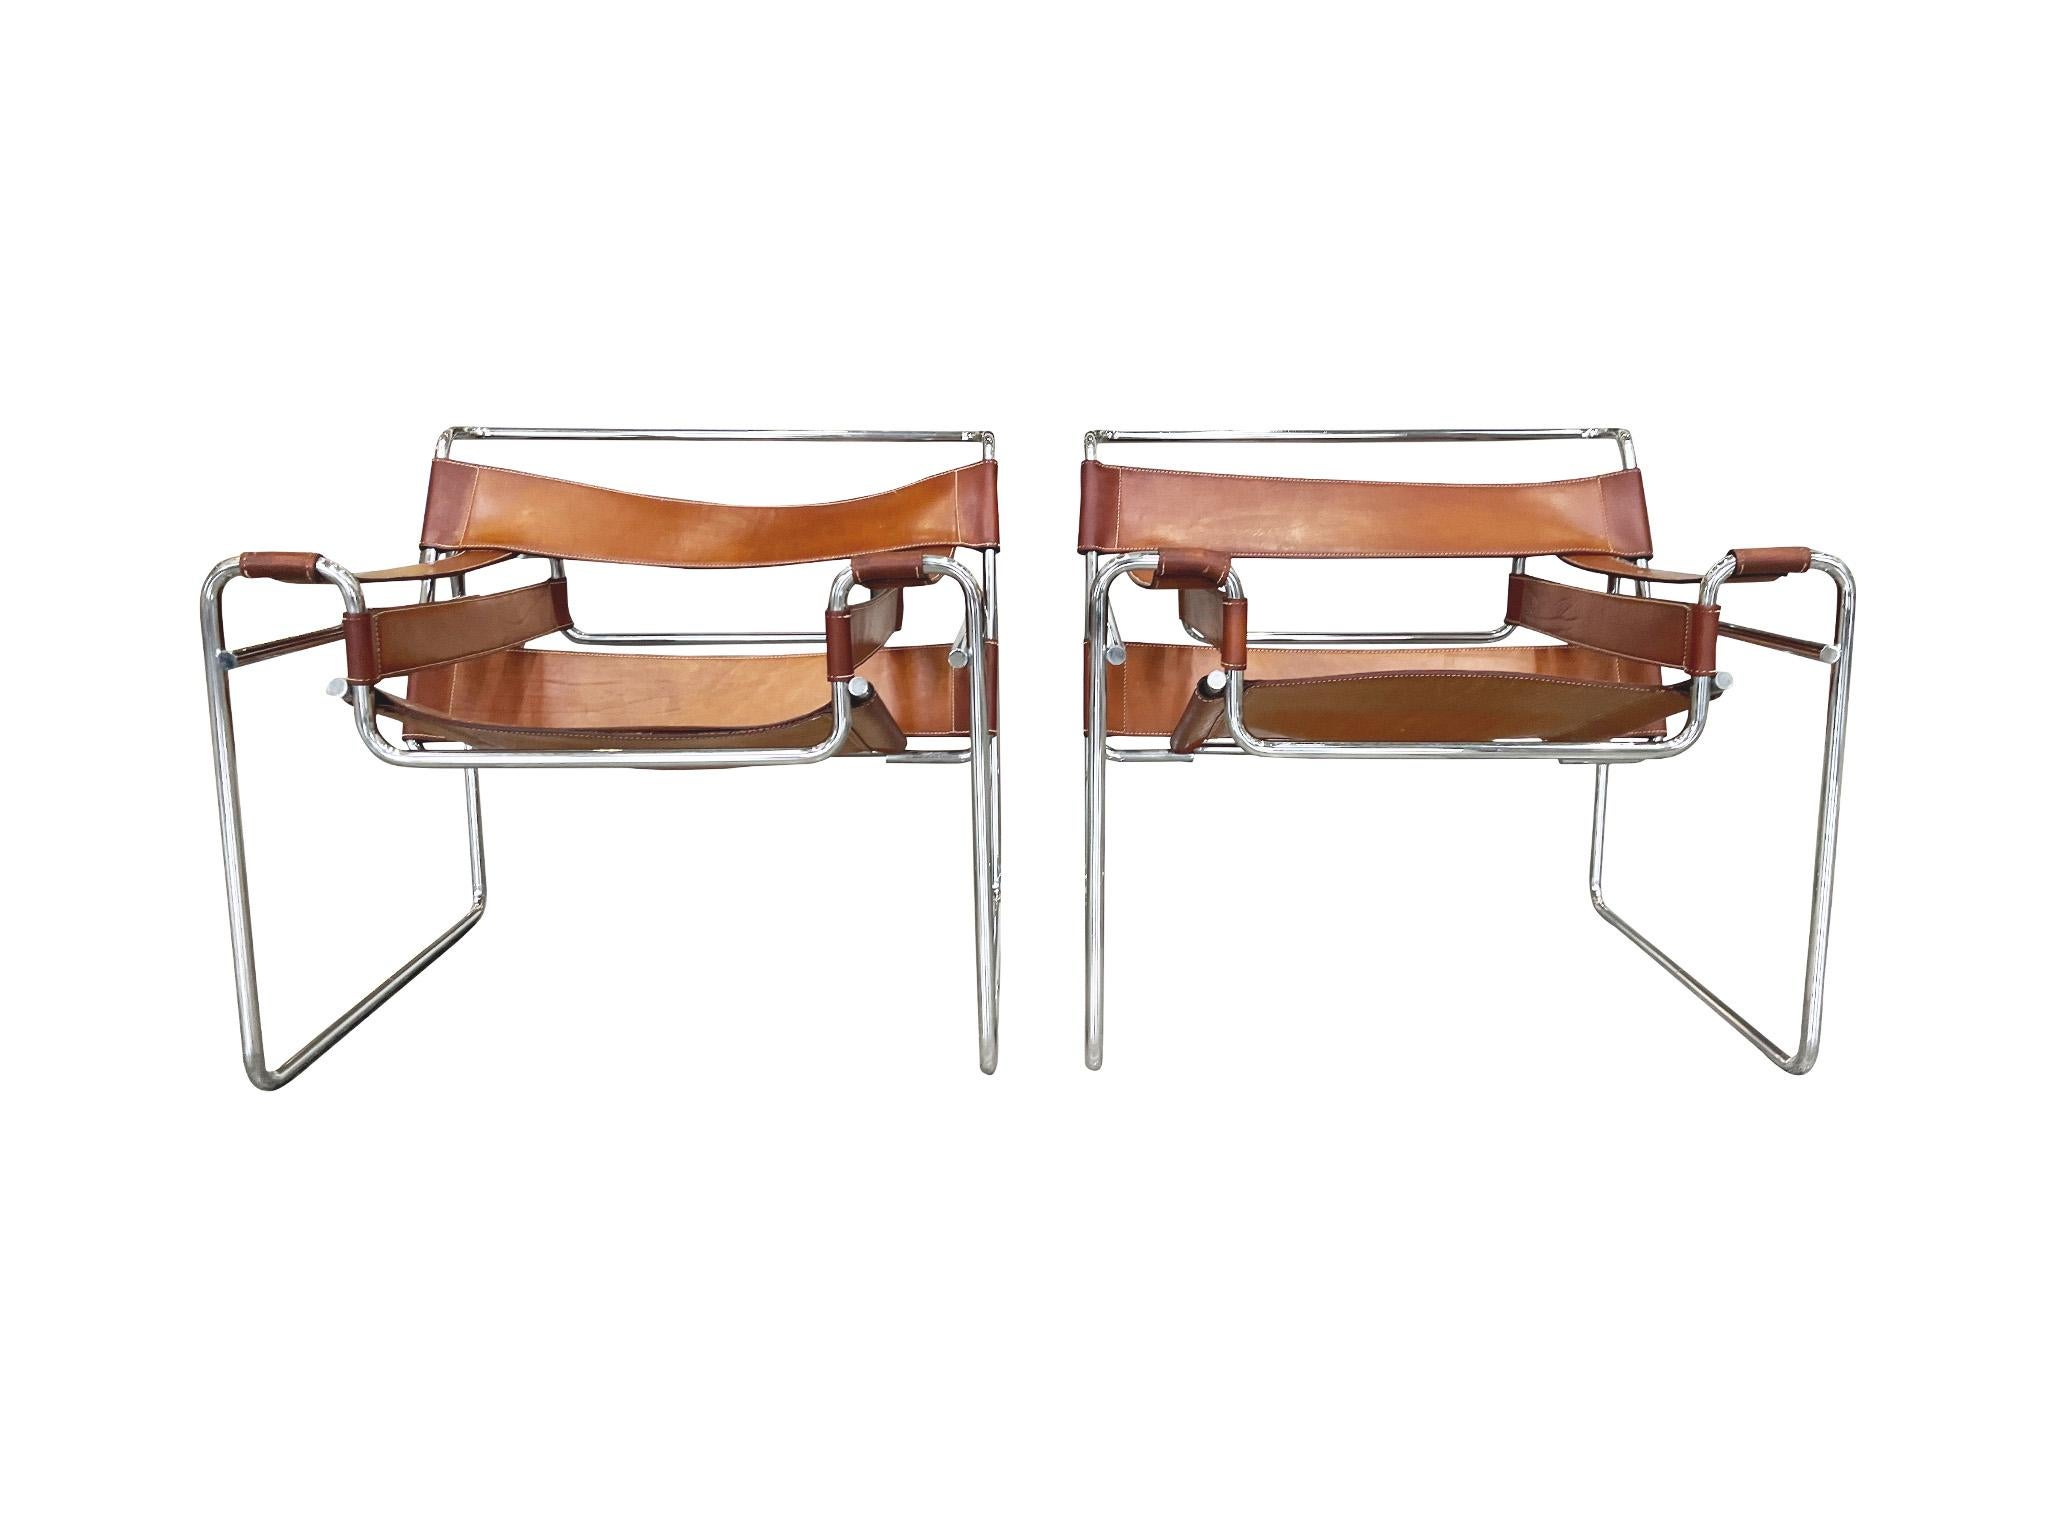 Designed in the 1920s by Marcel Breuer and manufactured in the late 1970s - early 1980s, these iconic Wassily chairs consist of tubular steel frames and leather seating, backing, and armrests. The leather has a rich, burnt-orange